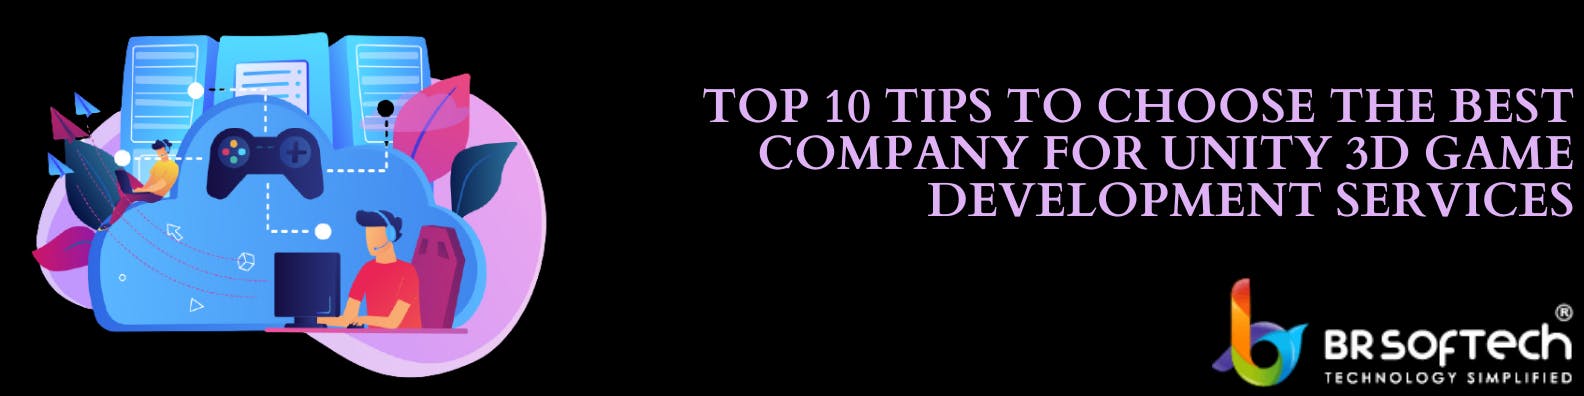 Top 13 Tips Choose the Best Company For HTML5 Game Development Services.png